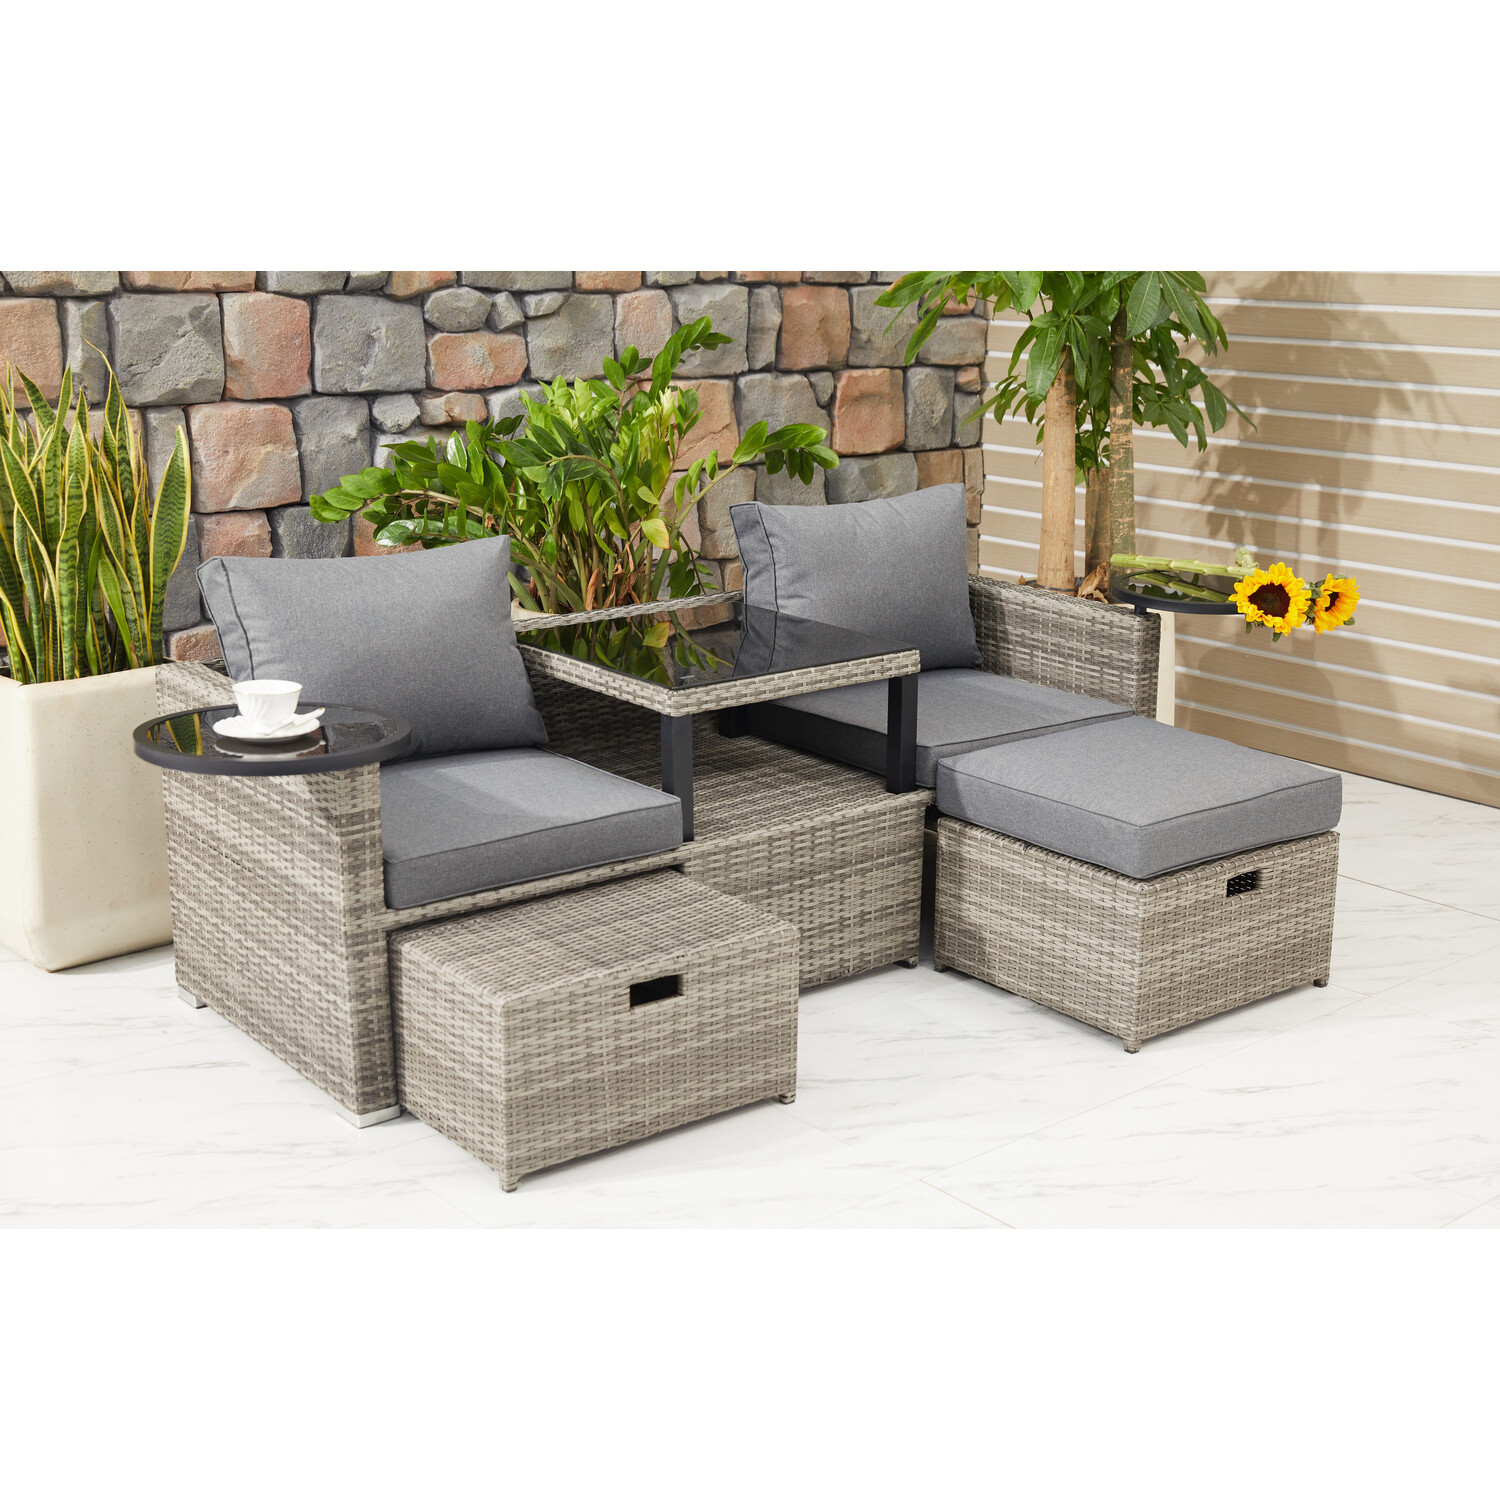 Malay Deluxe Malay New Hampshire 2 Seater Natural Transformer Patio Set Image 12